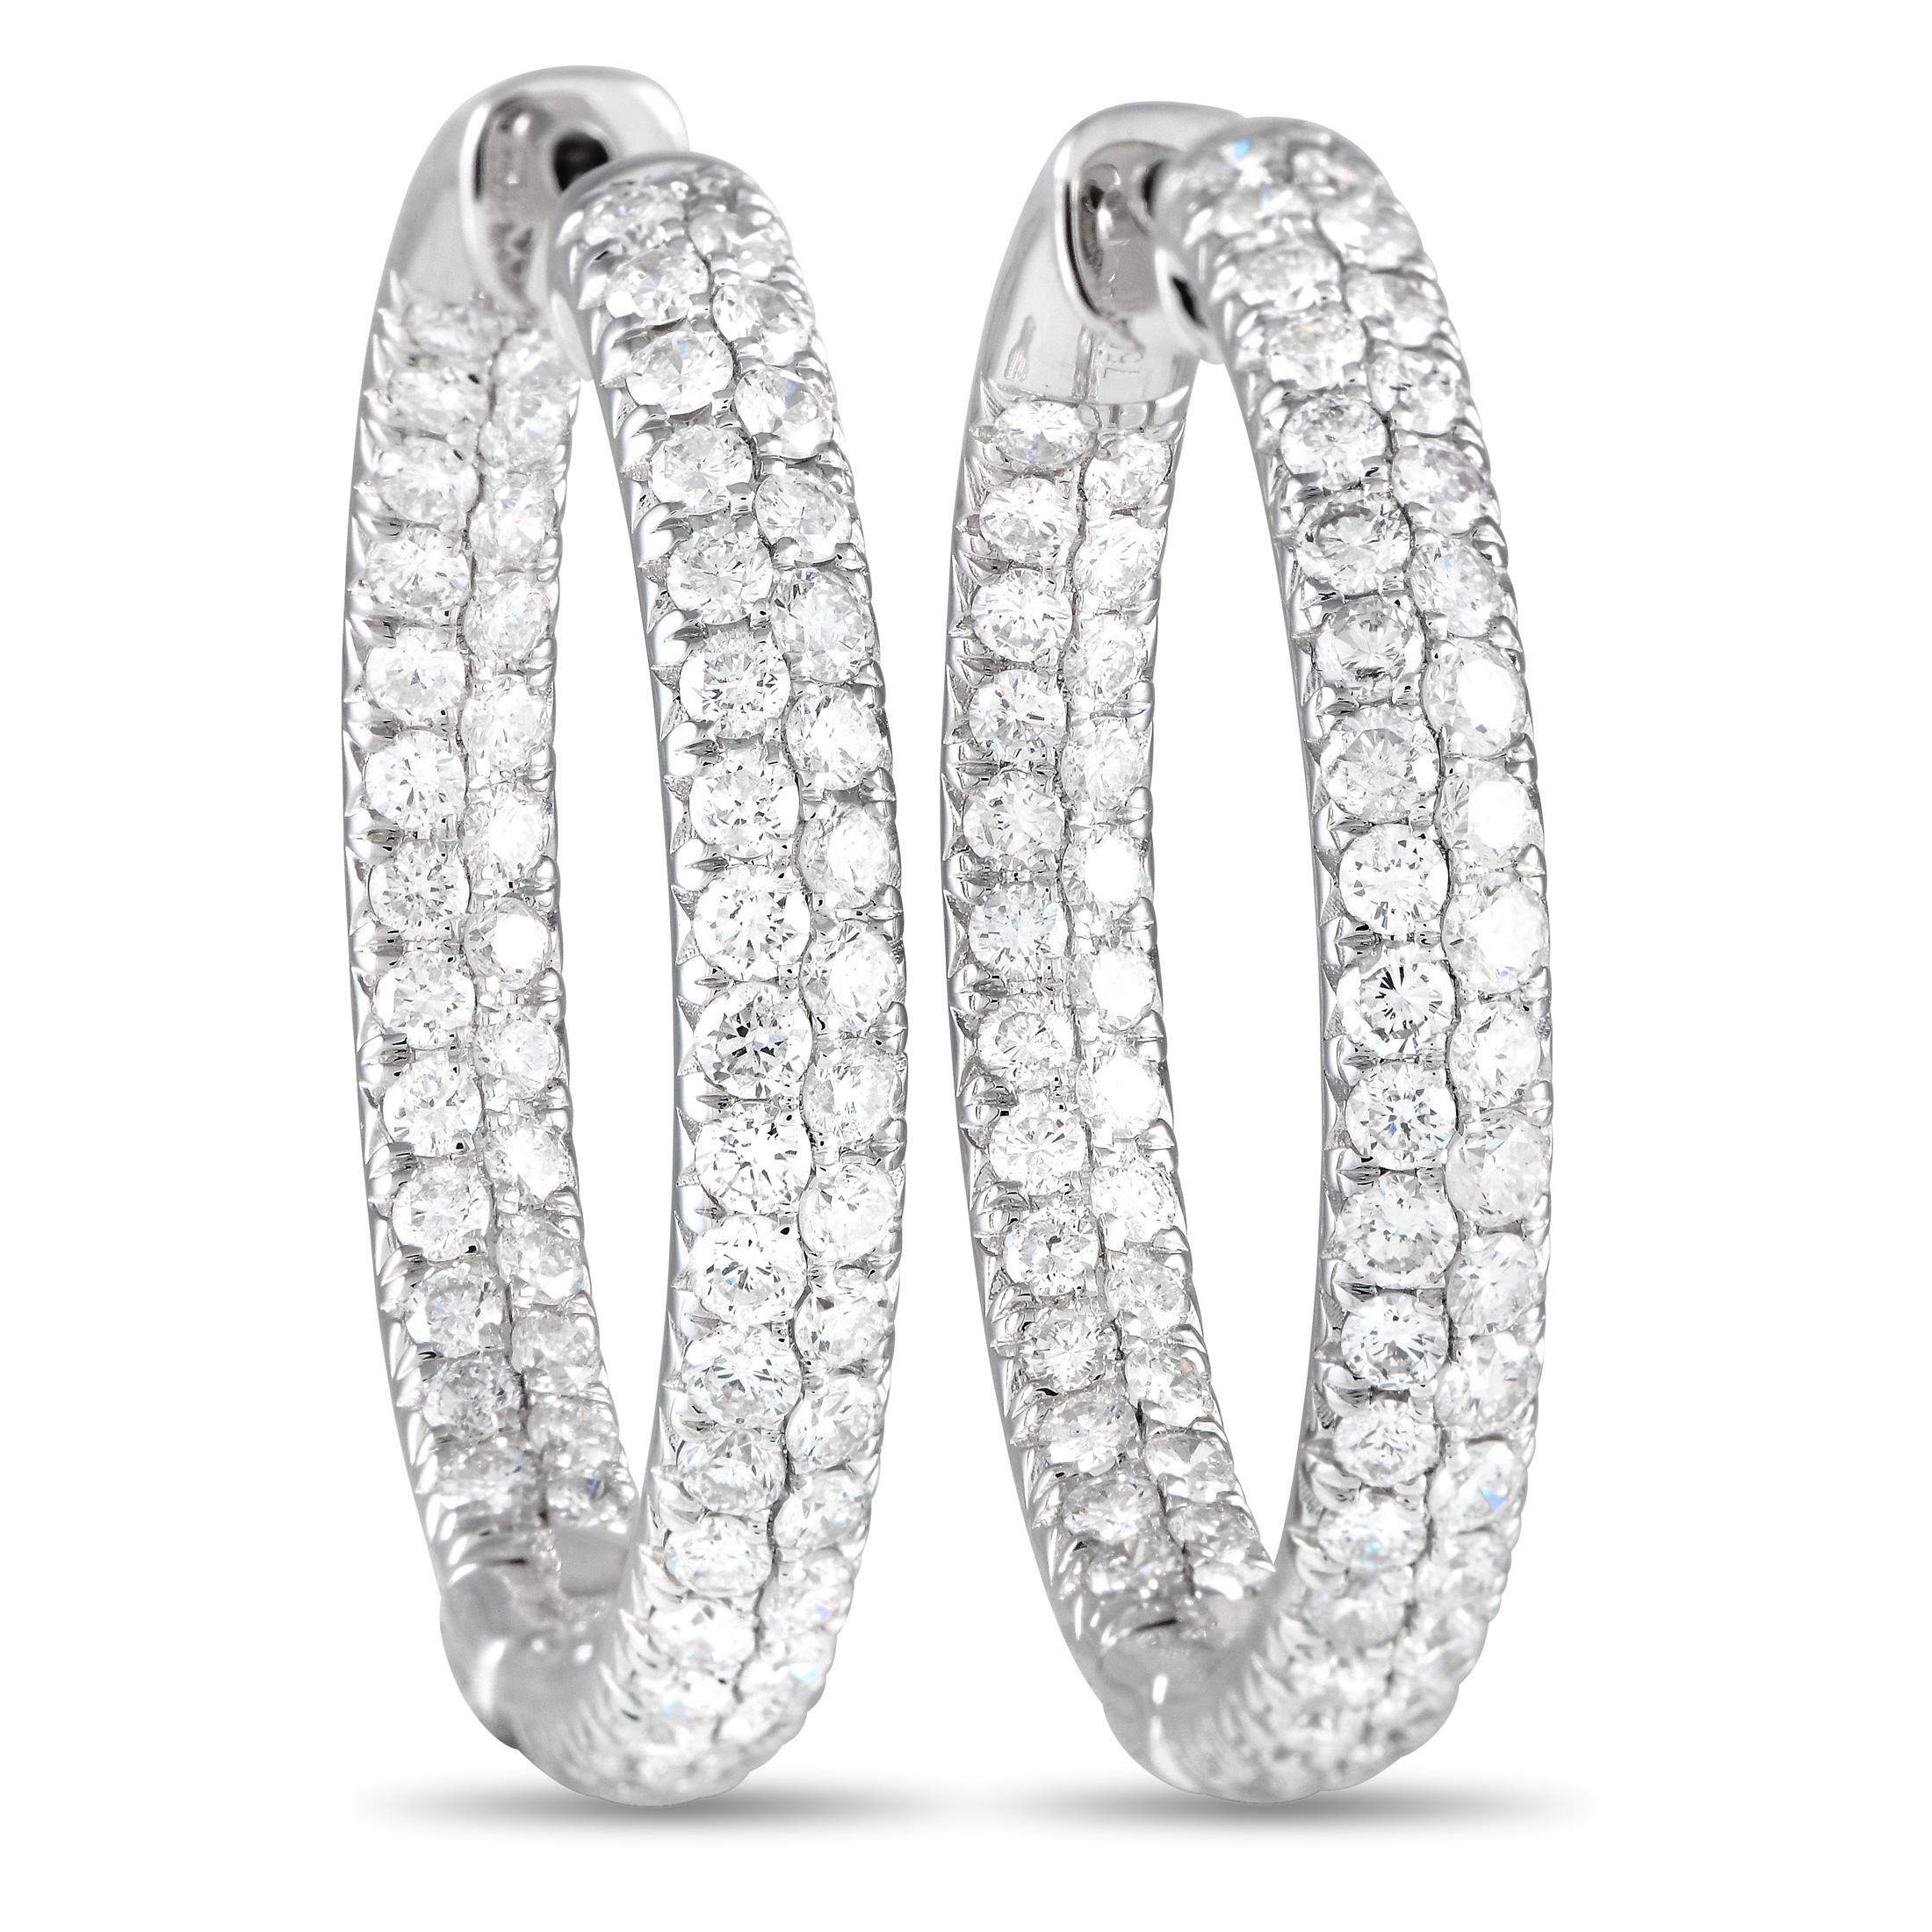 LB Exclusive 18K White Gold 3.55ct Diamond Inside-Out Hoop Earrings In New Condition For Sale In Southampton, PA